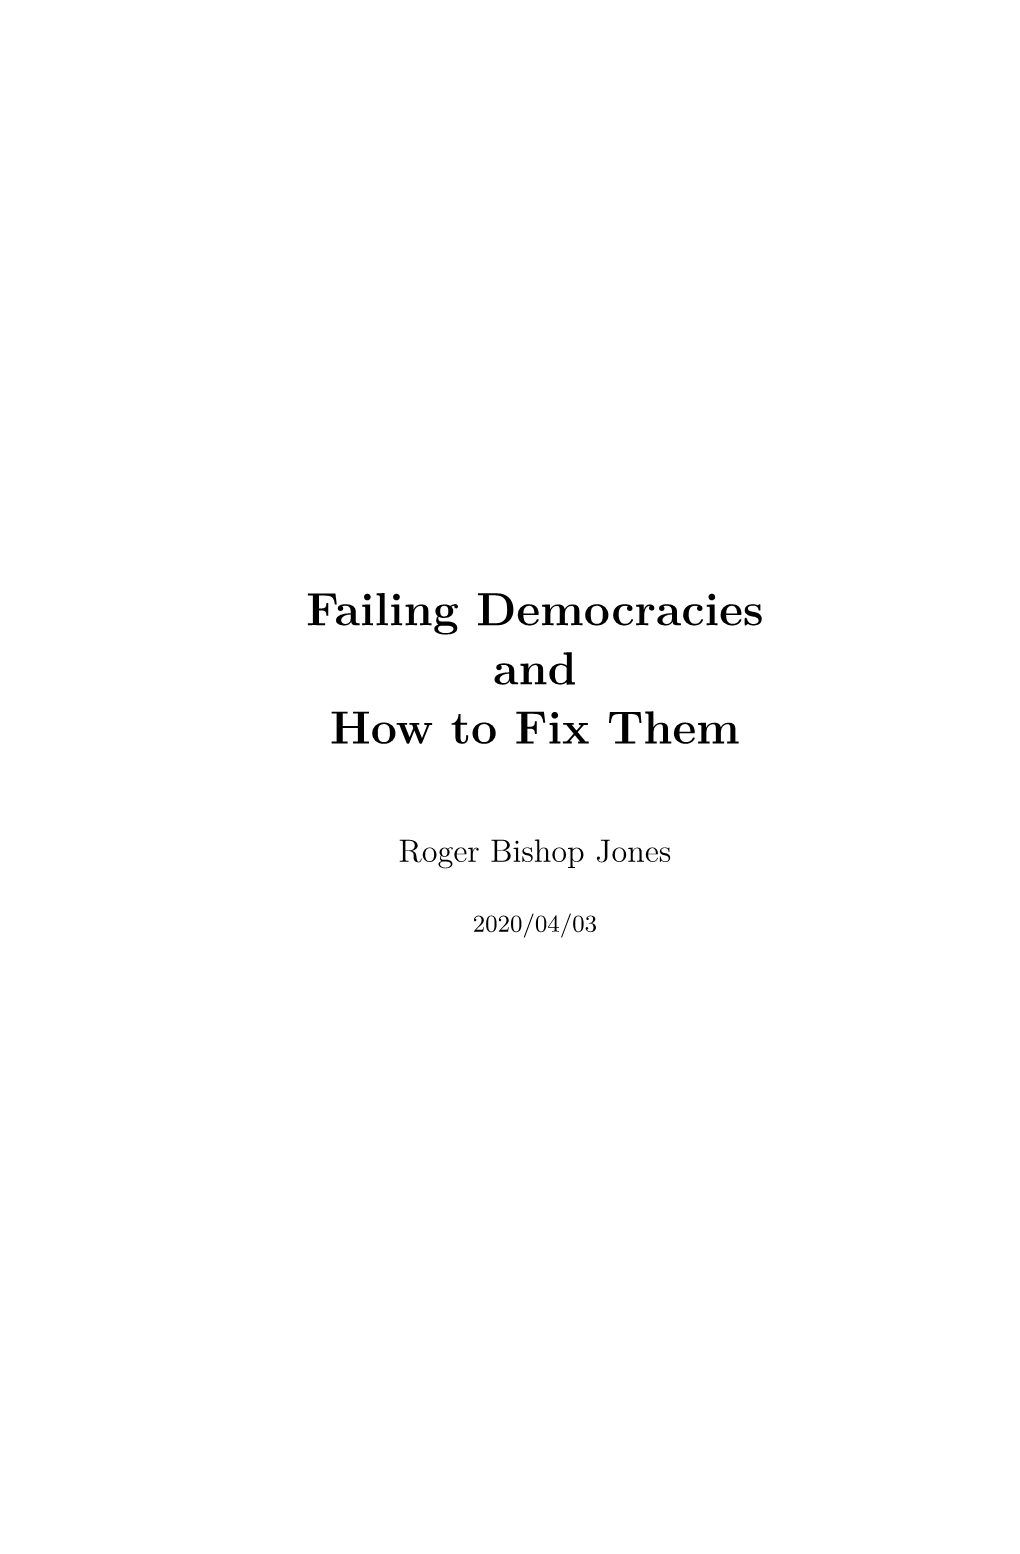 Failing Democracies and How to Fix Them